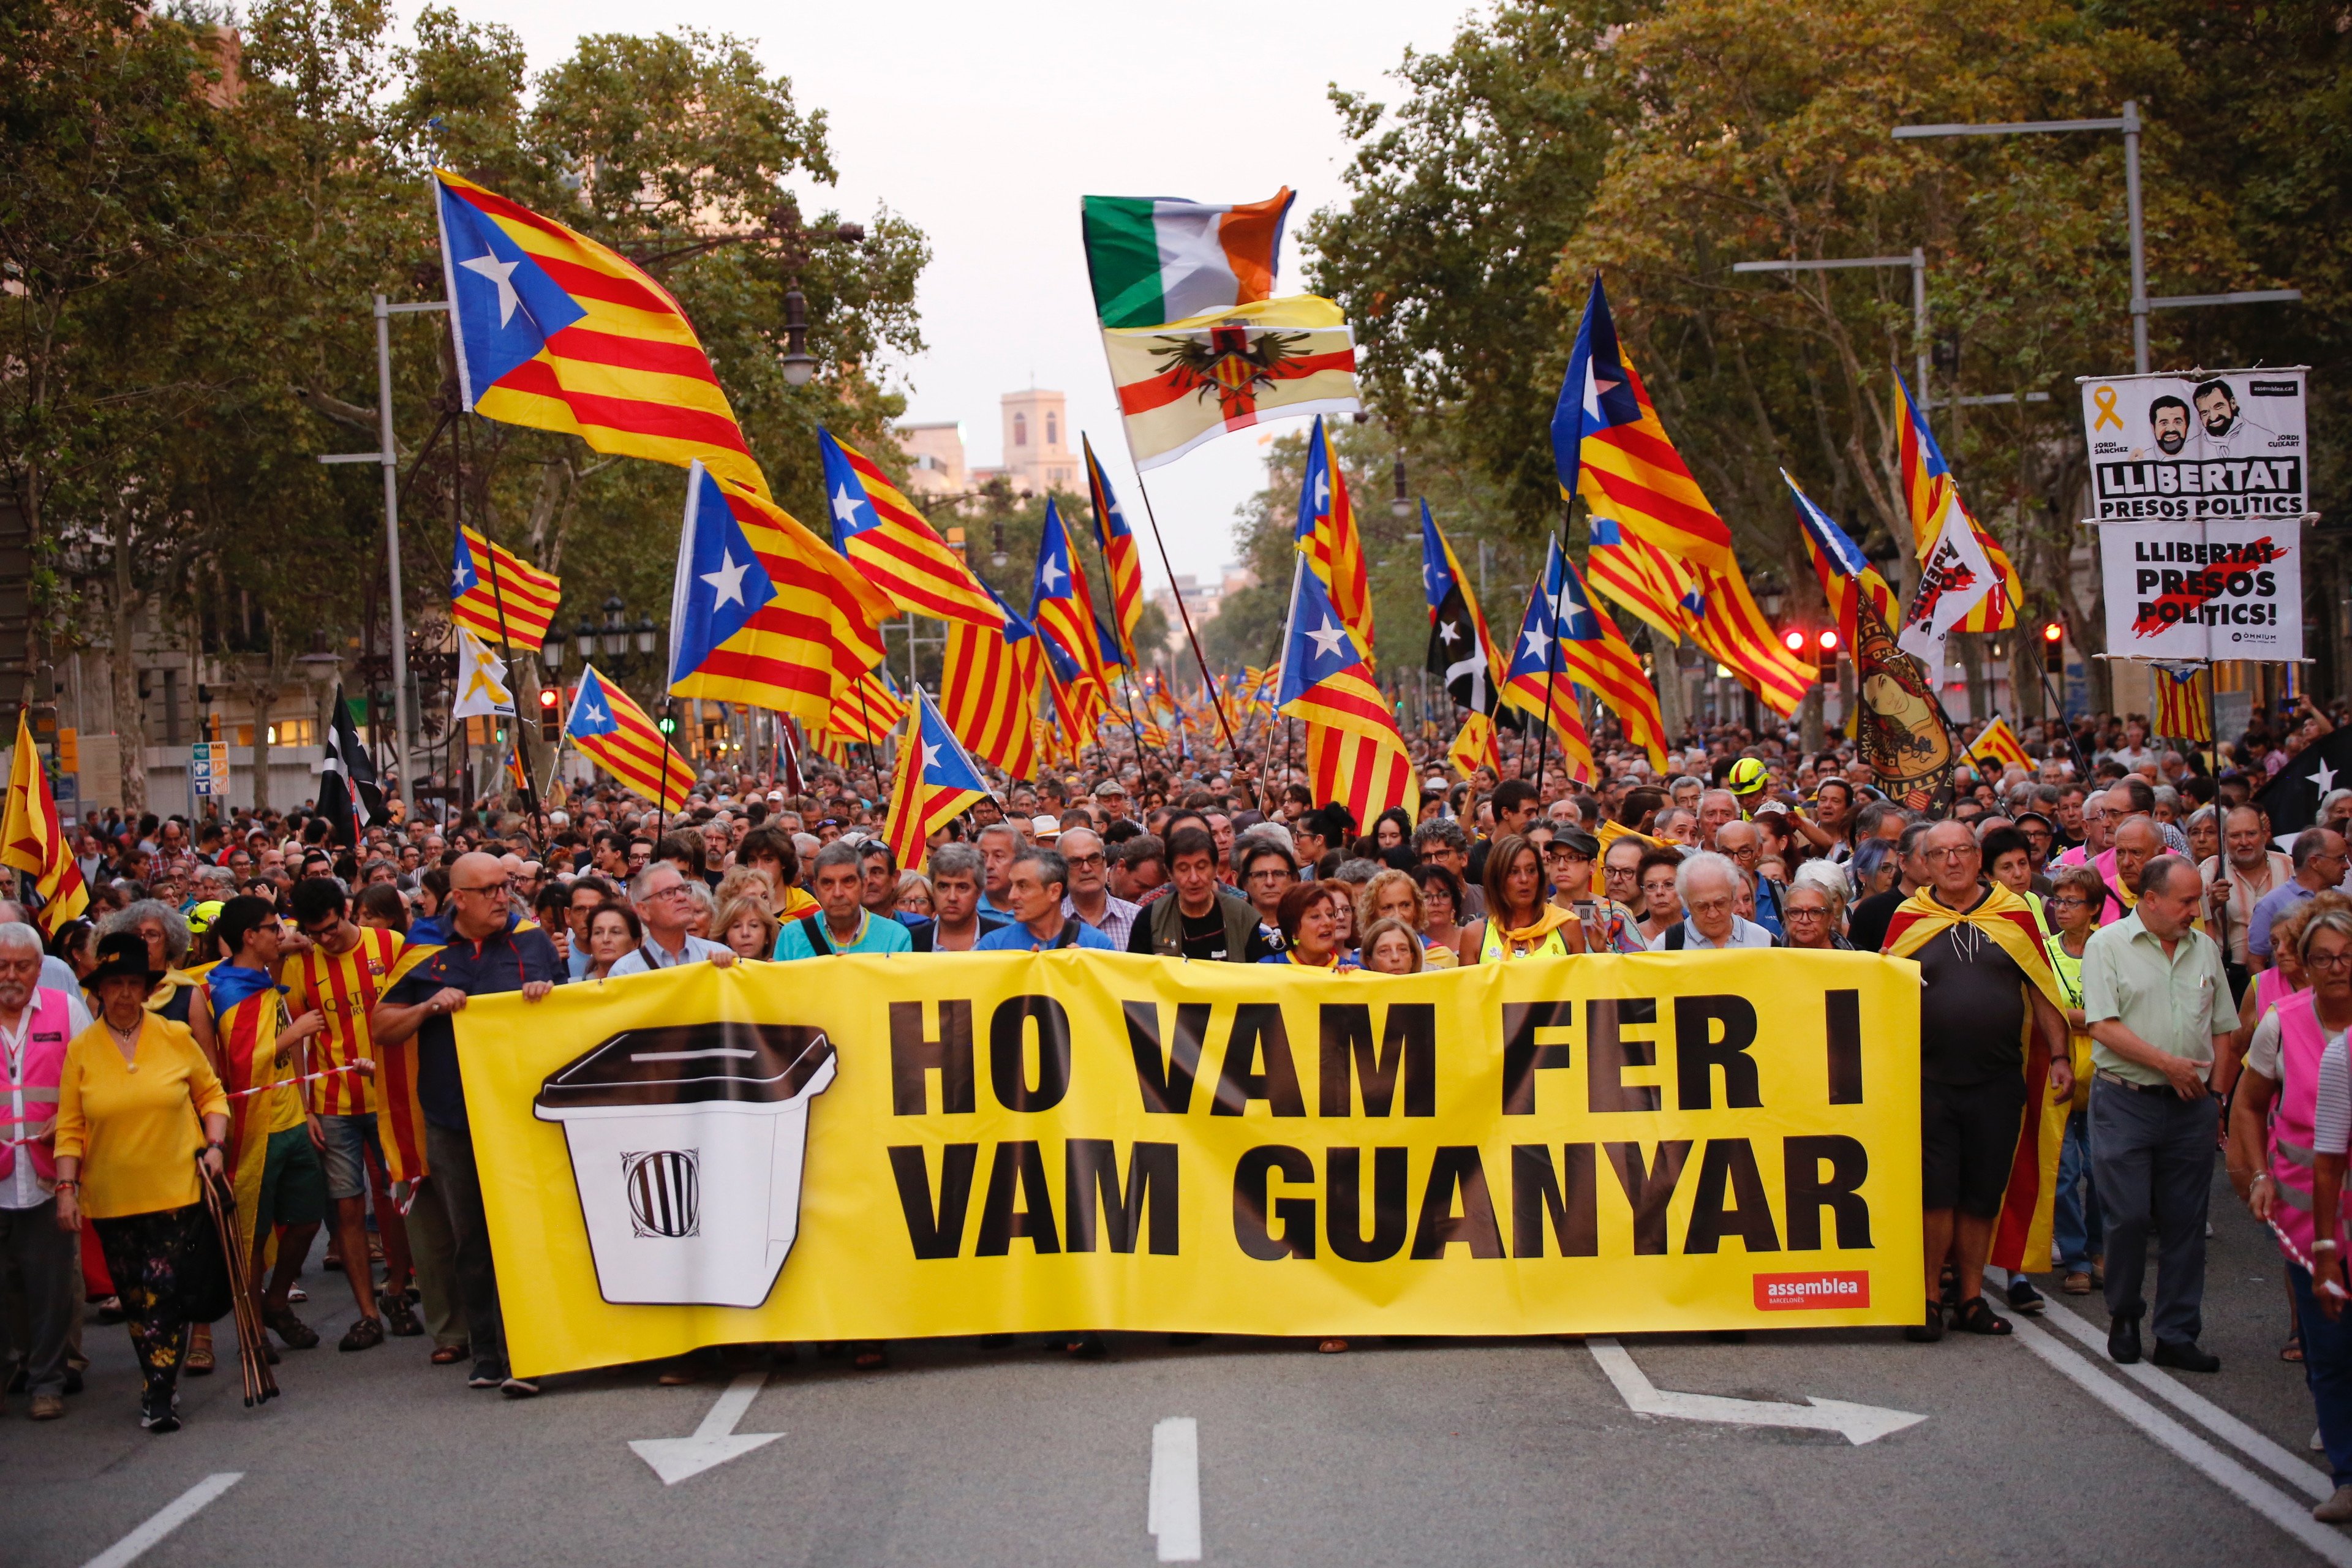 Court of Accounts must return €6 million it wrongly demanded from Catalan officials